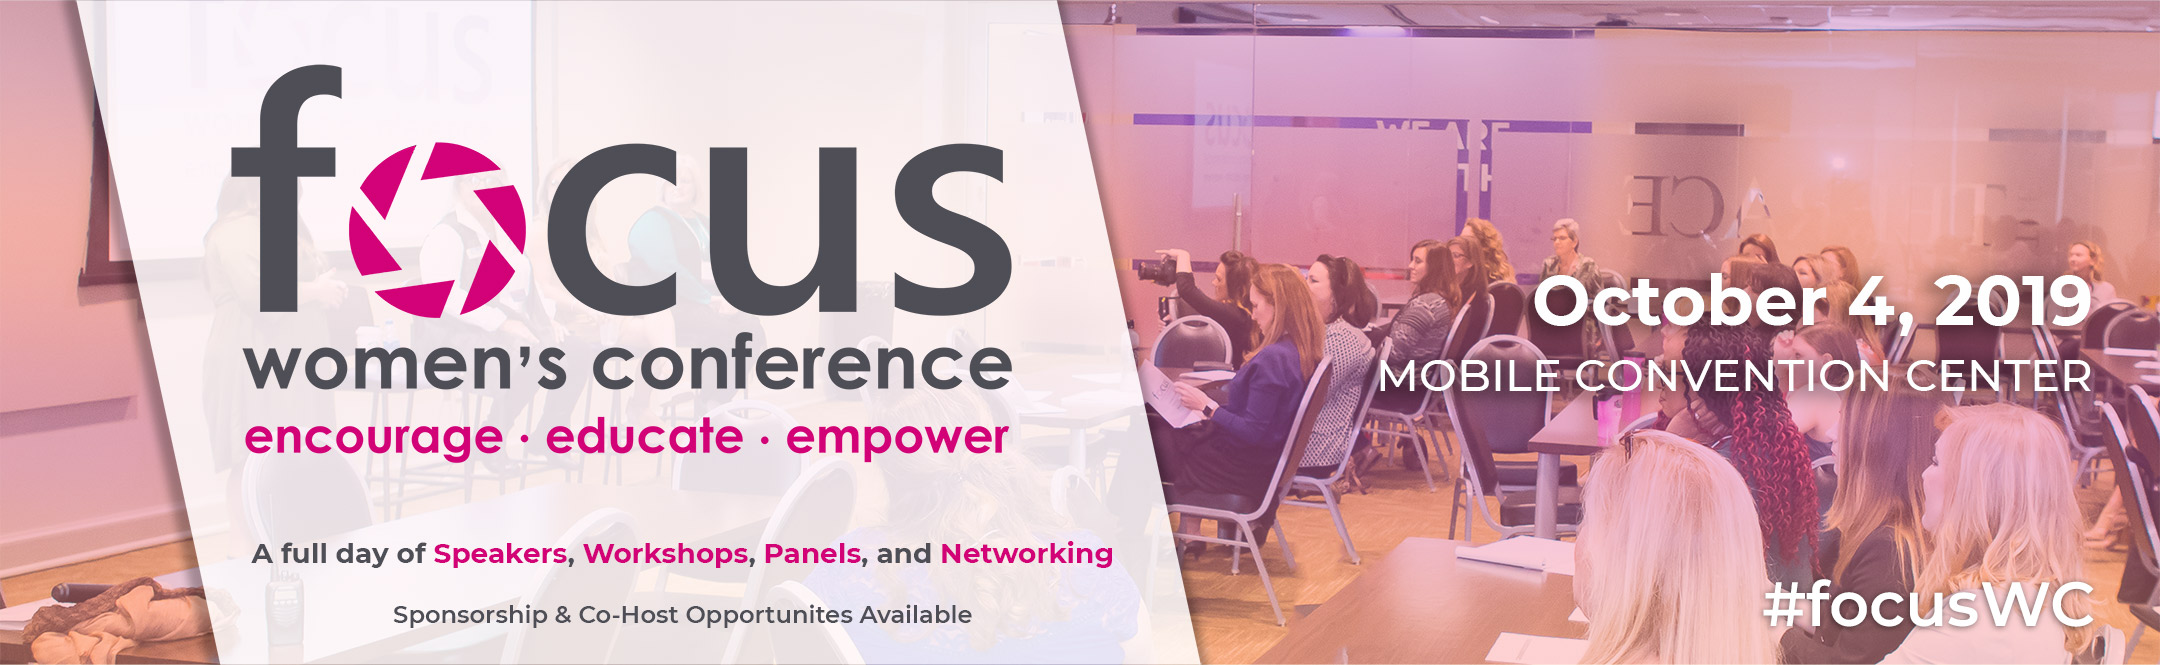 Focus Women's Conference